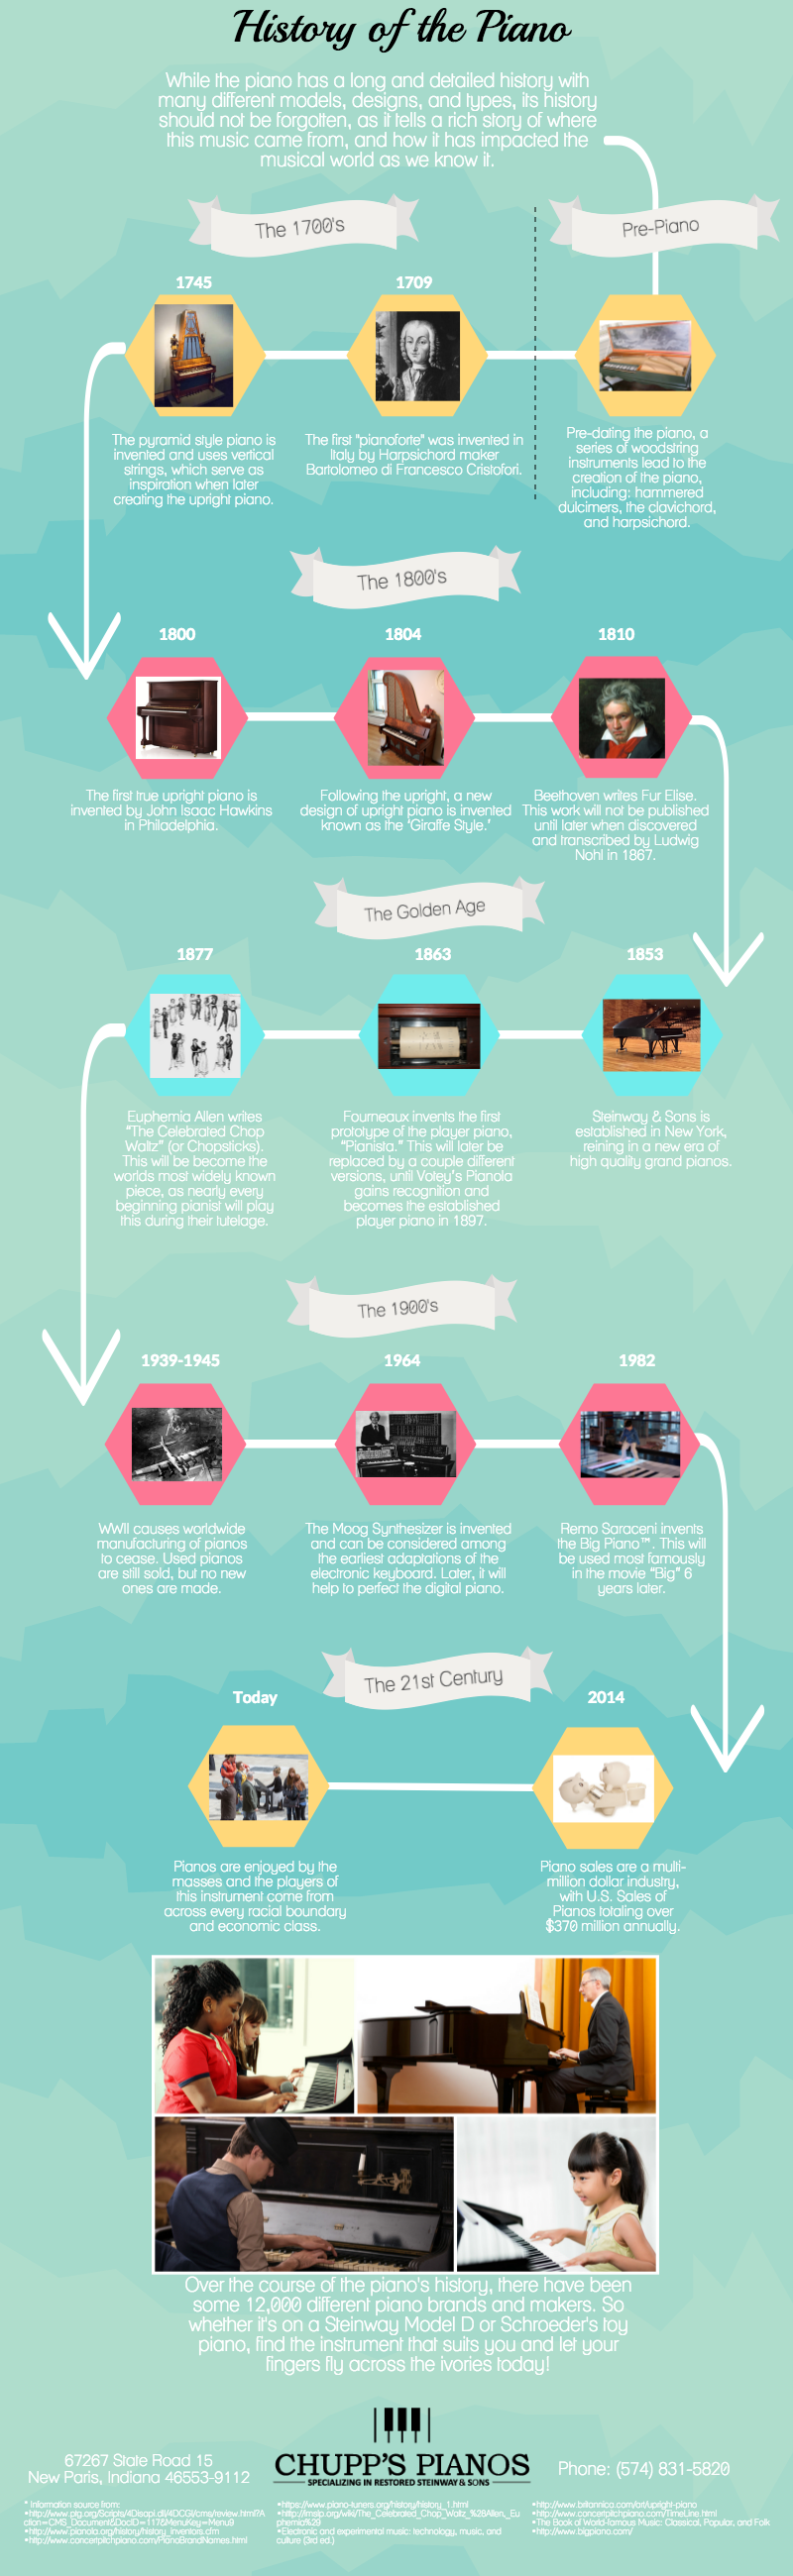 History of the Piano Infographic